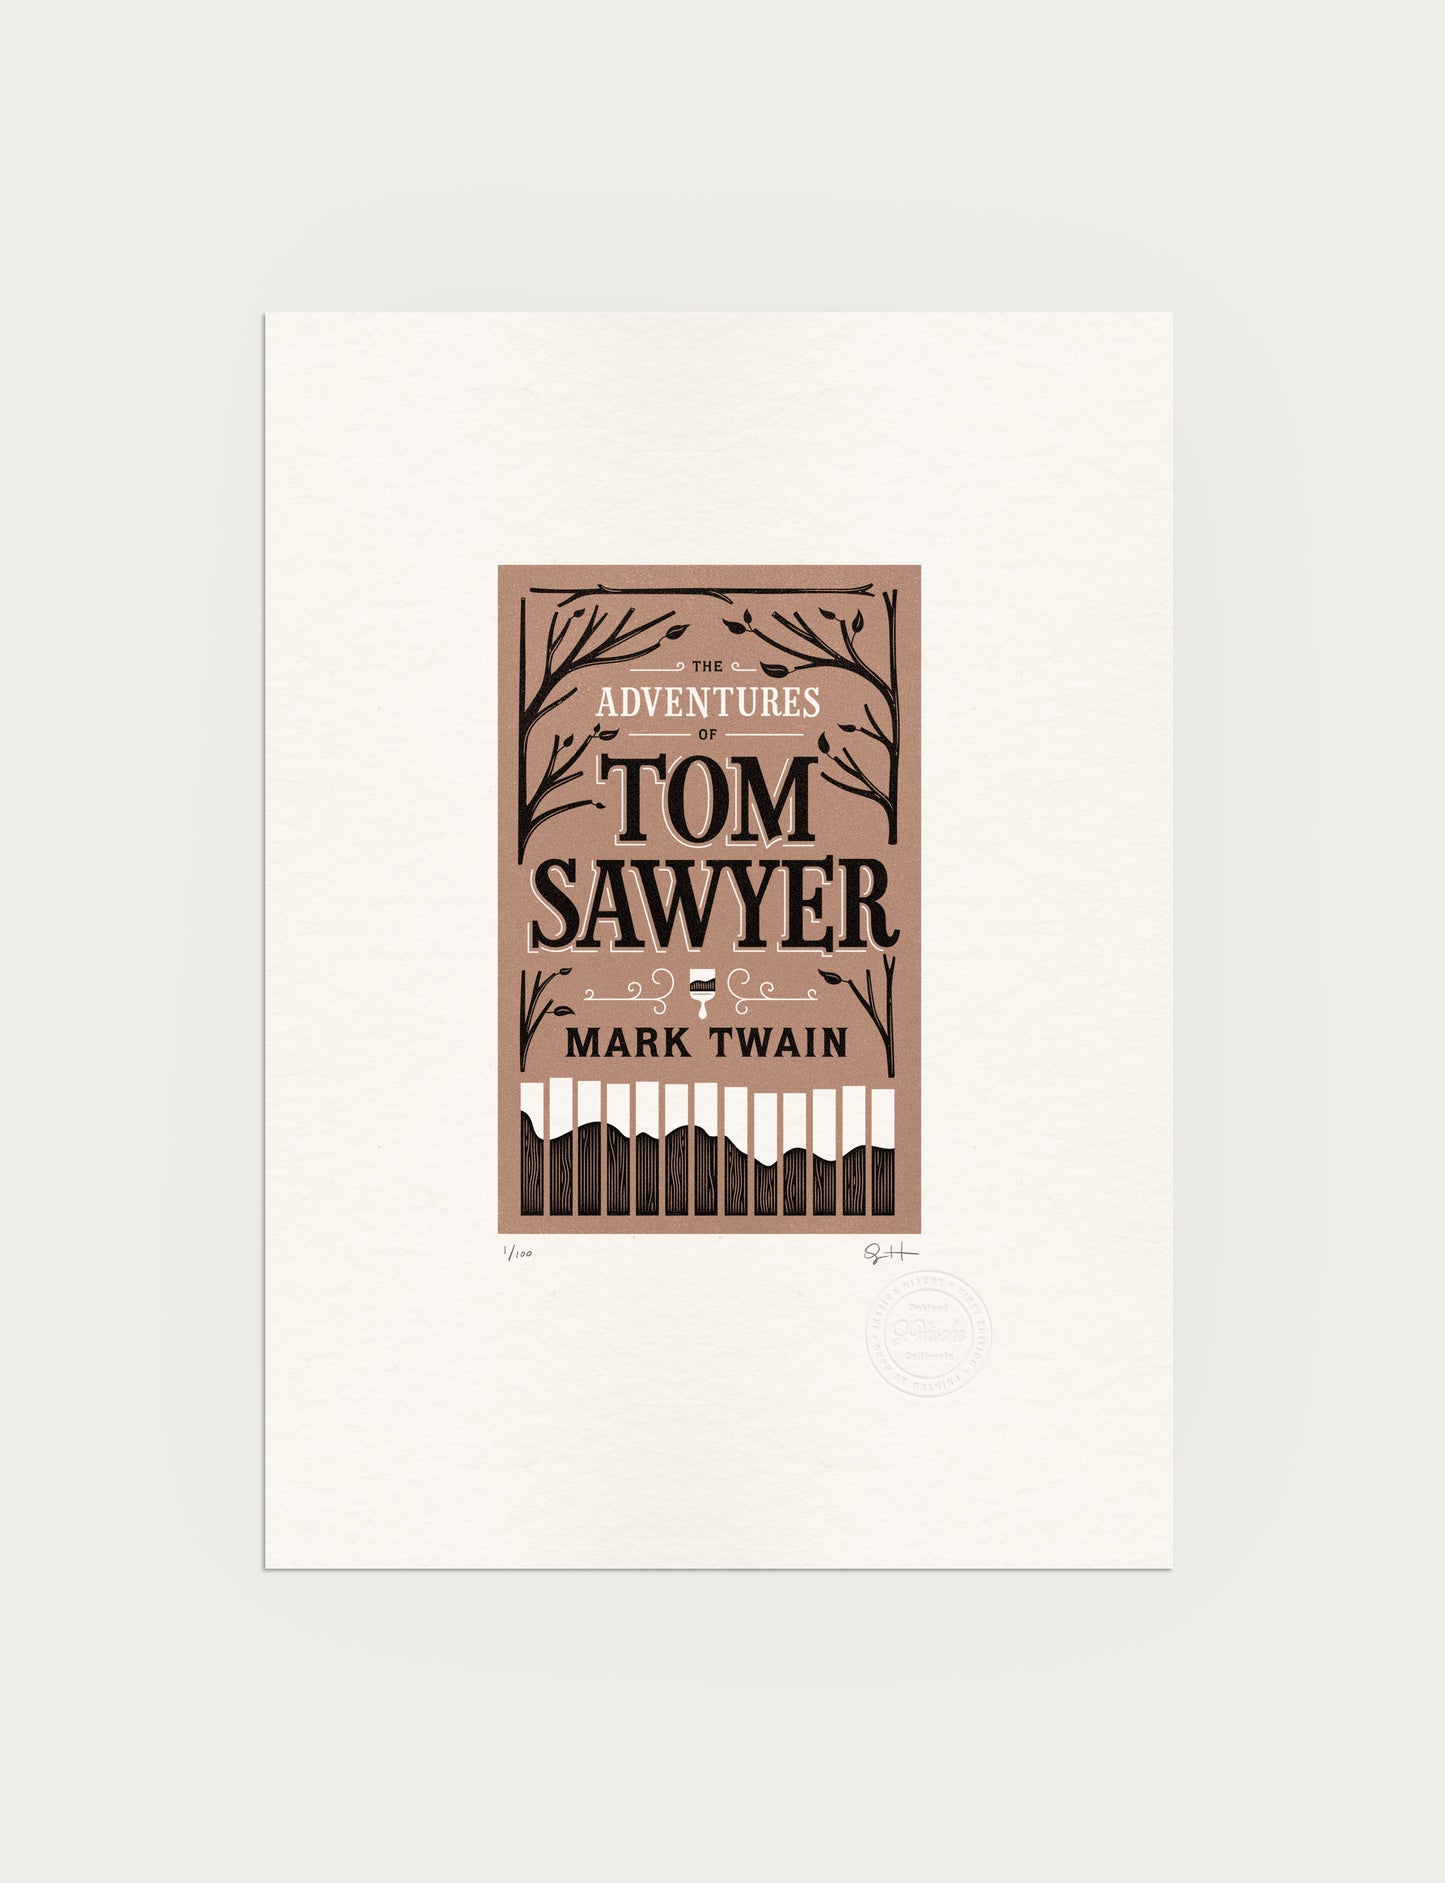 2-color letterpress print in brown and black. Printed artwork is an illustrated book cover of The Adventures of Tom Sawyer including custom hand lettering.